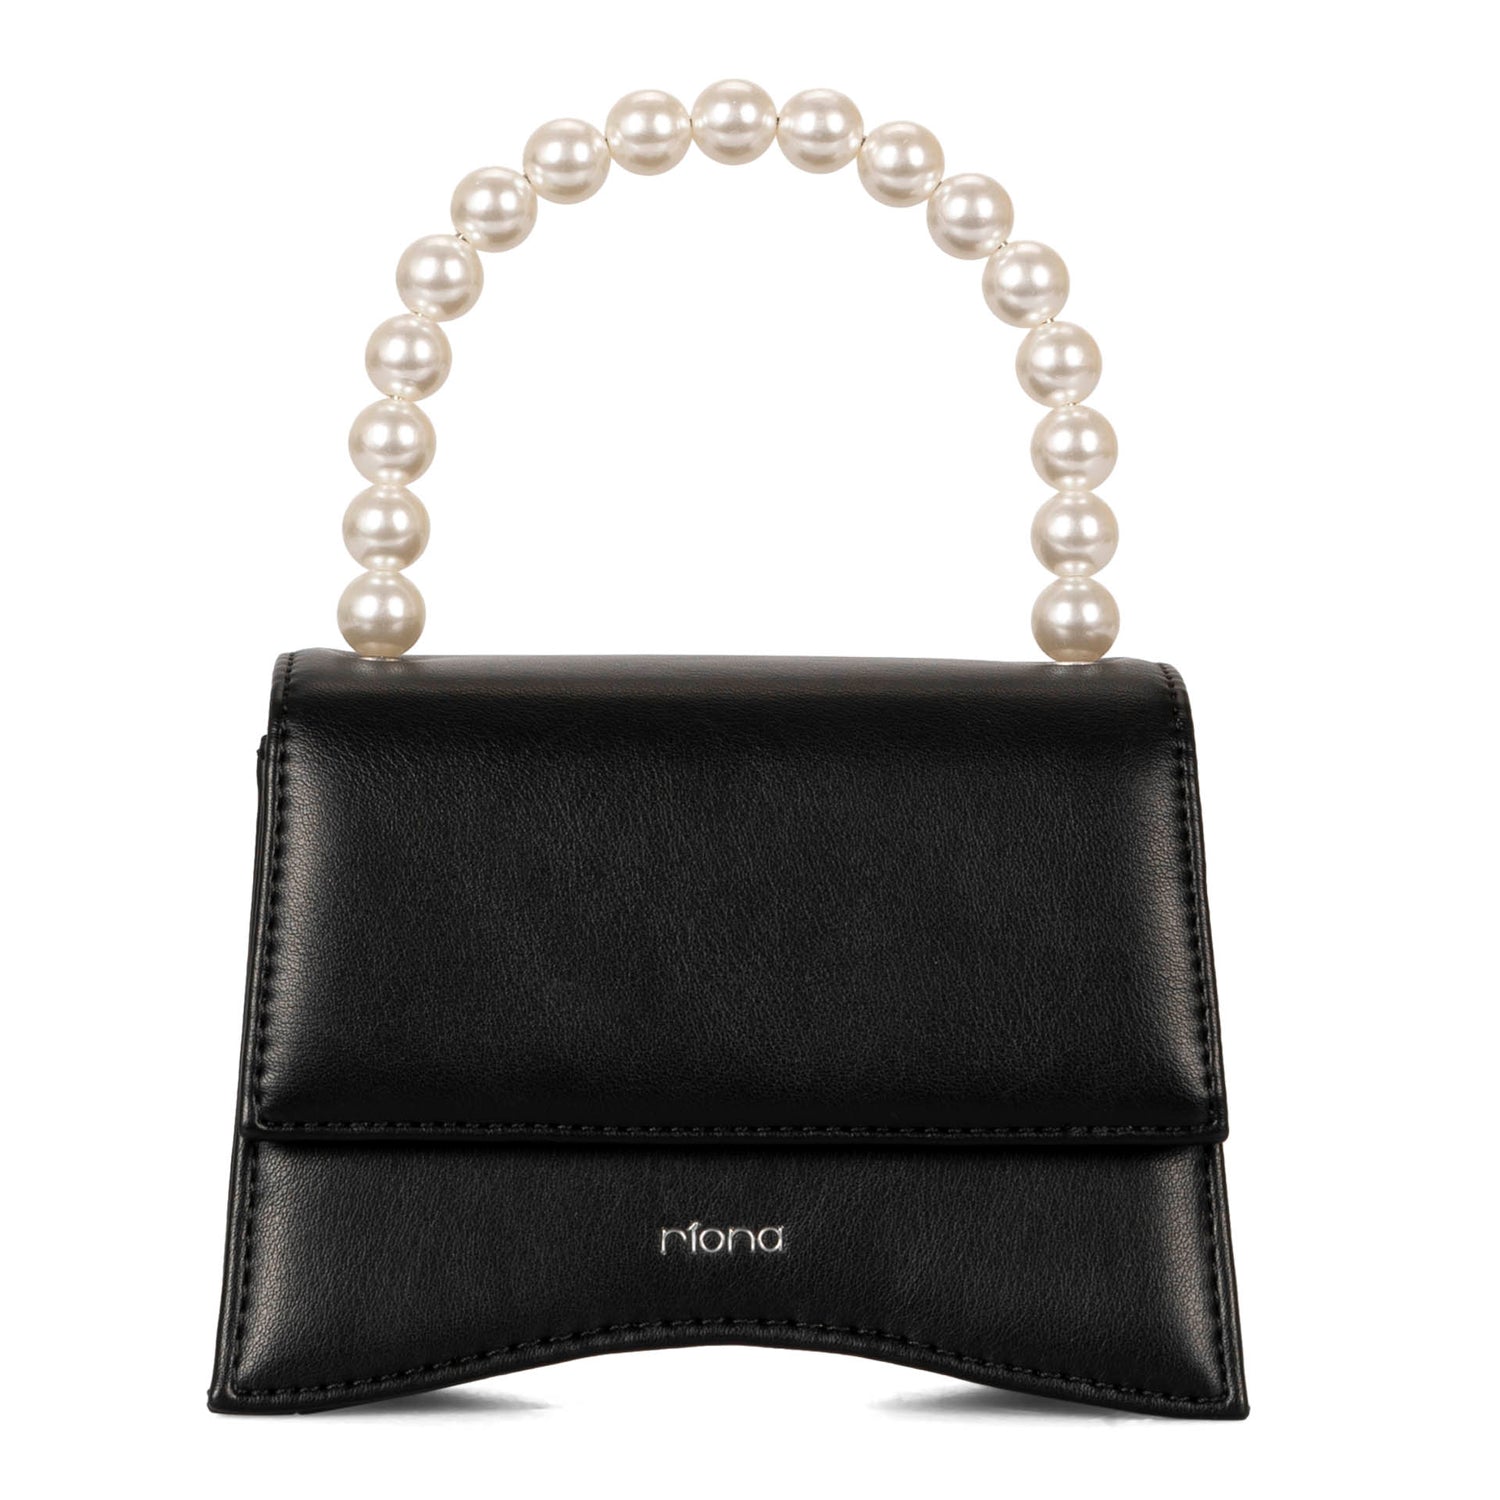 Front side view of a black vegan mini crossbody bag called Evening designed  by Riona showcasing its pearl-like handle, smooth PU texture, and Riona branded on the front.